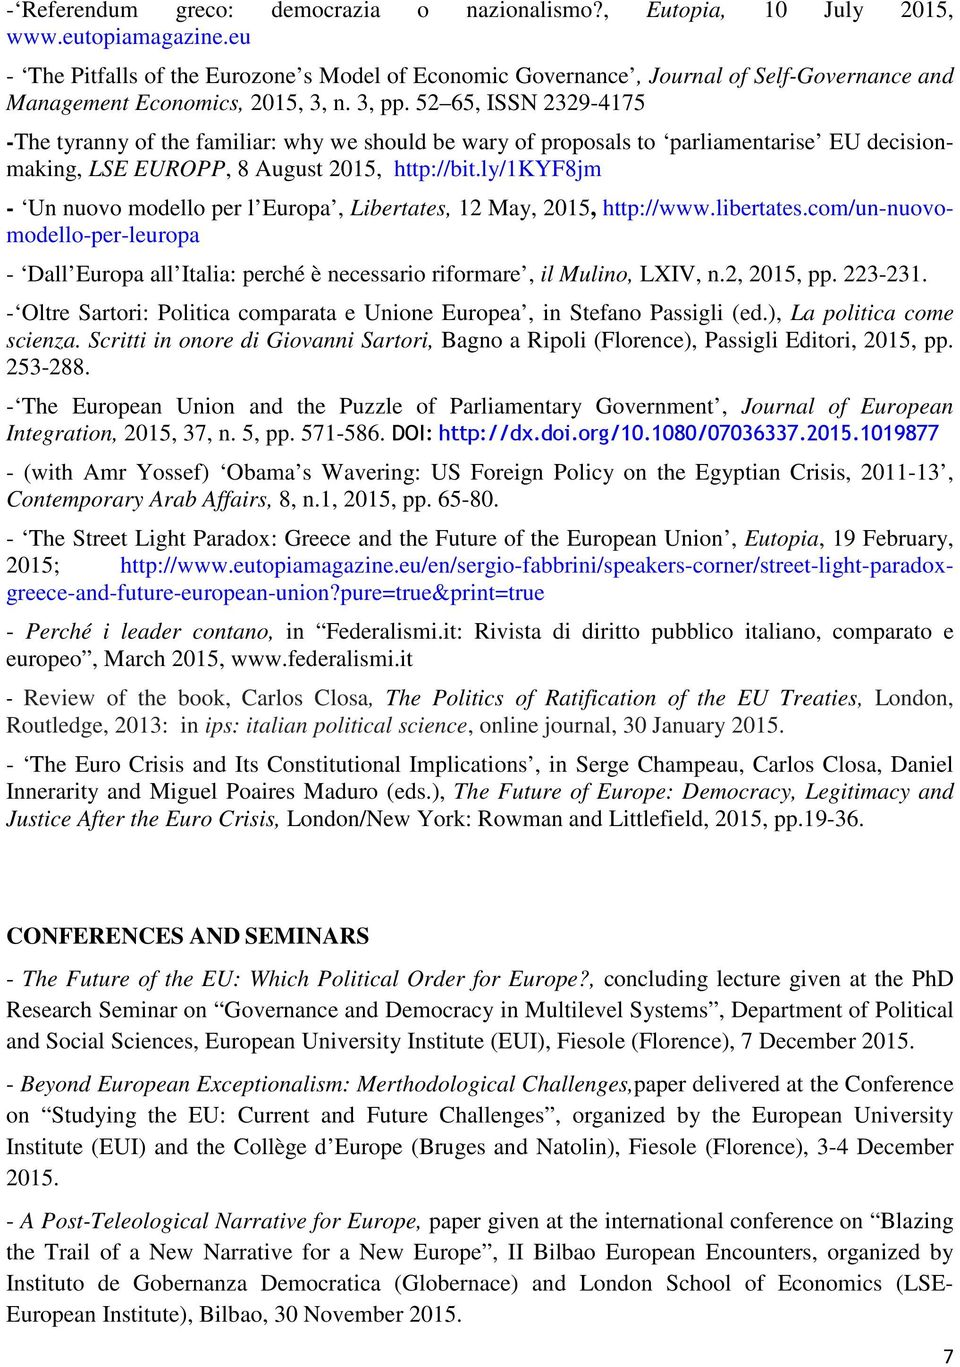 52 65, ISSN 2329-4175 -The tyranny of the familiar: why we should be wary of proposals to parliamentarise EU decisionmaking, LSE EUROPP, 8 August 2015, http://bit.